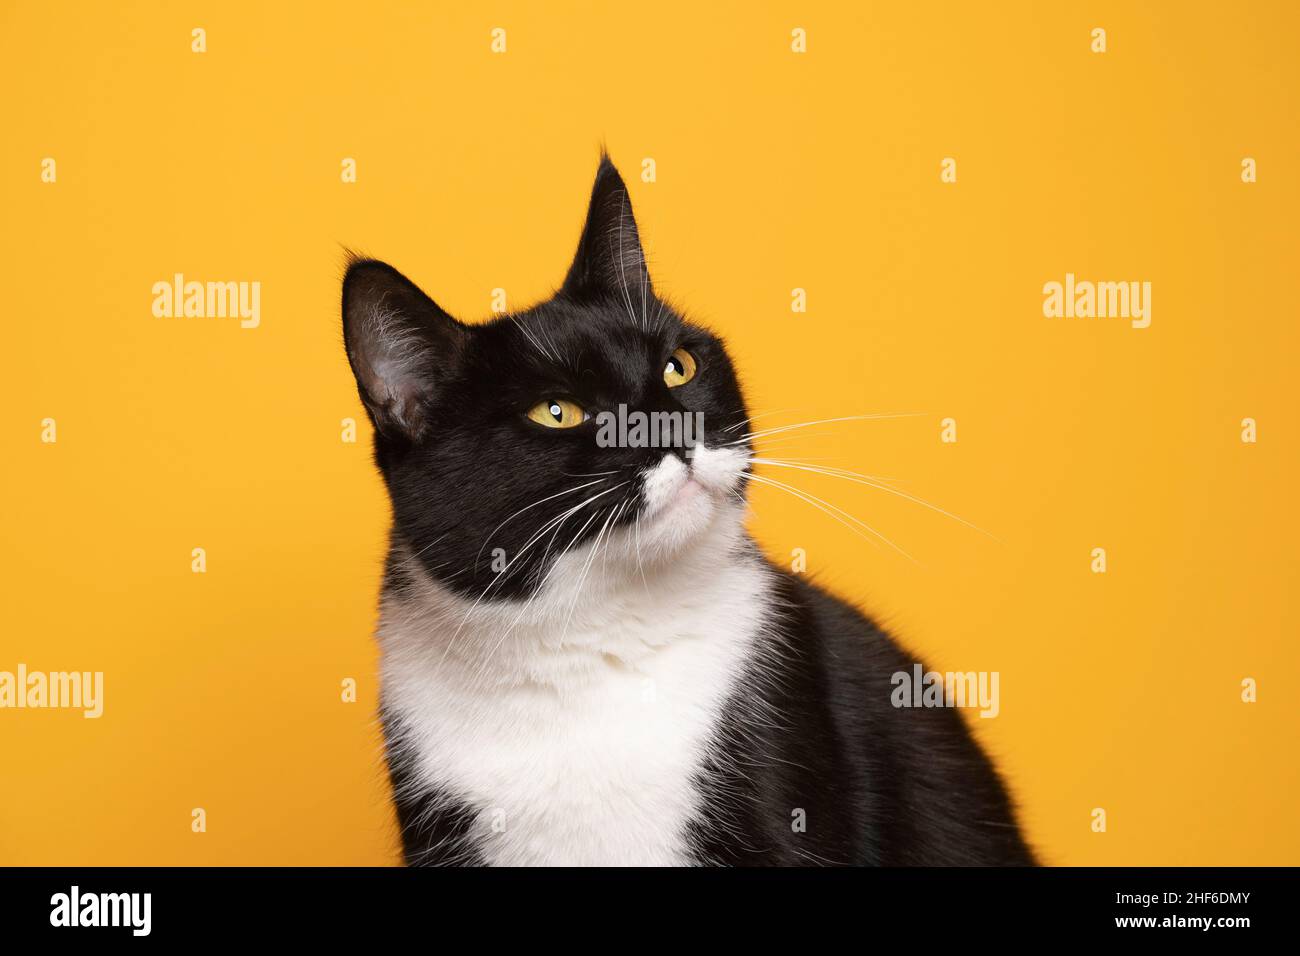 black and white tuxedo cat with yellow eyes looking tot he side on yellow background with copy space Stock Photo